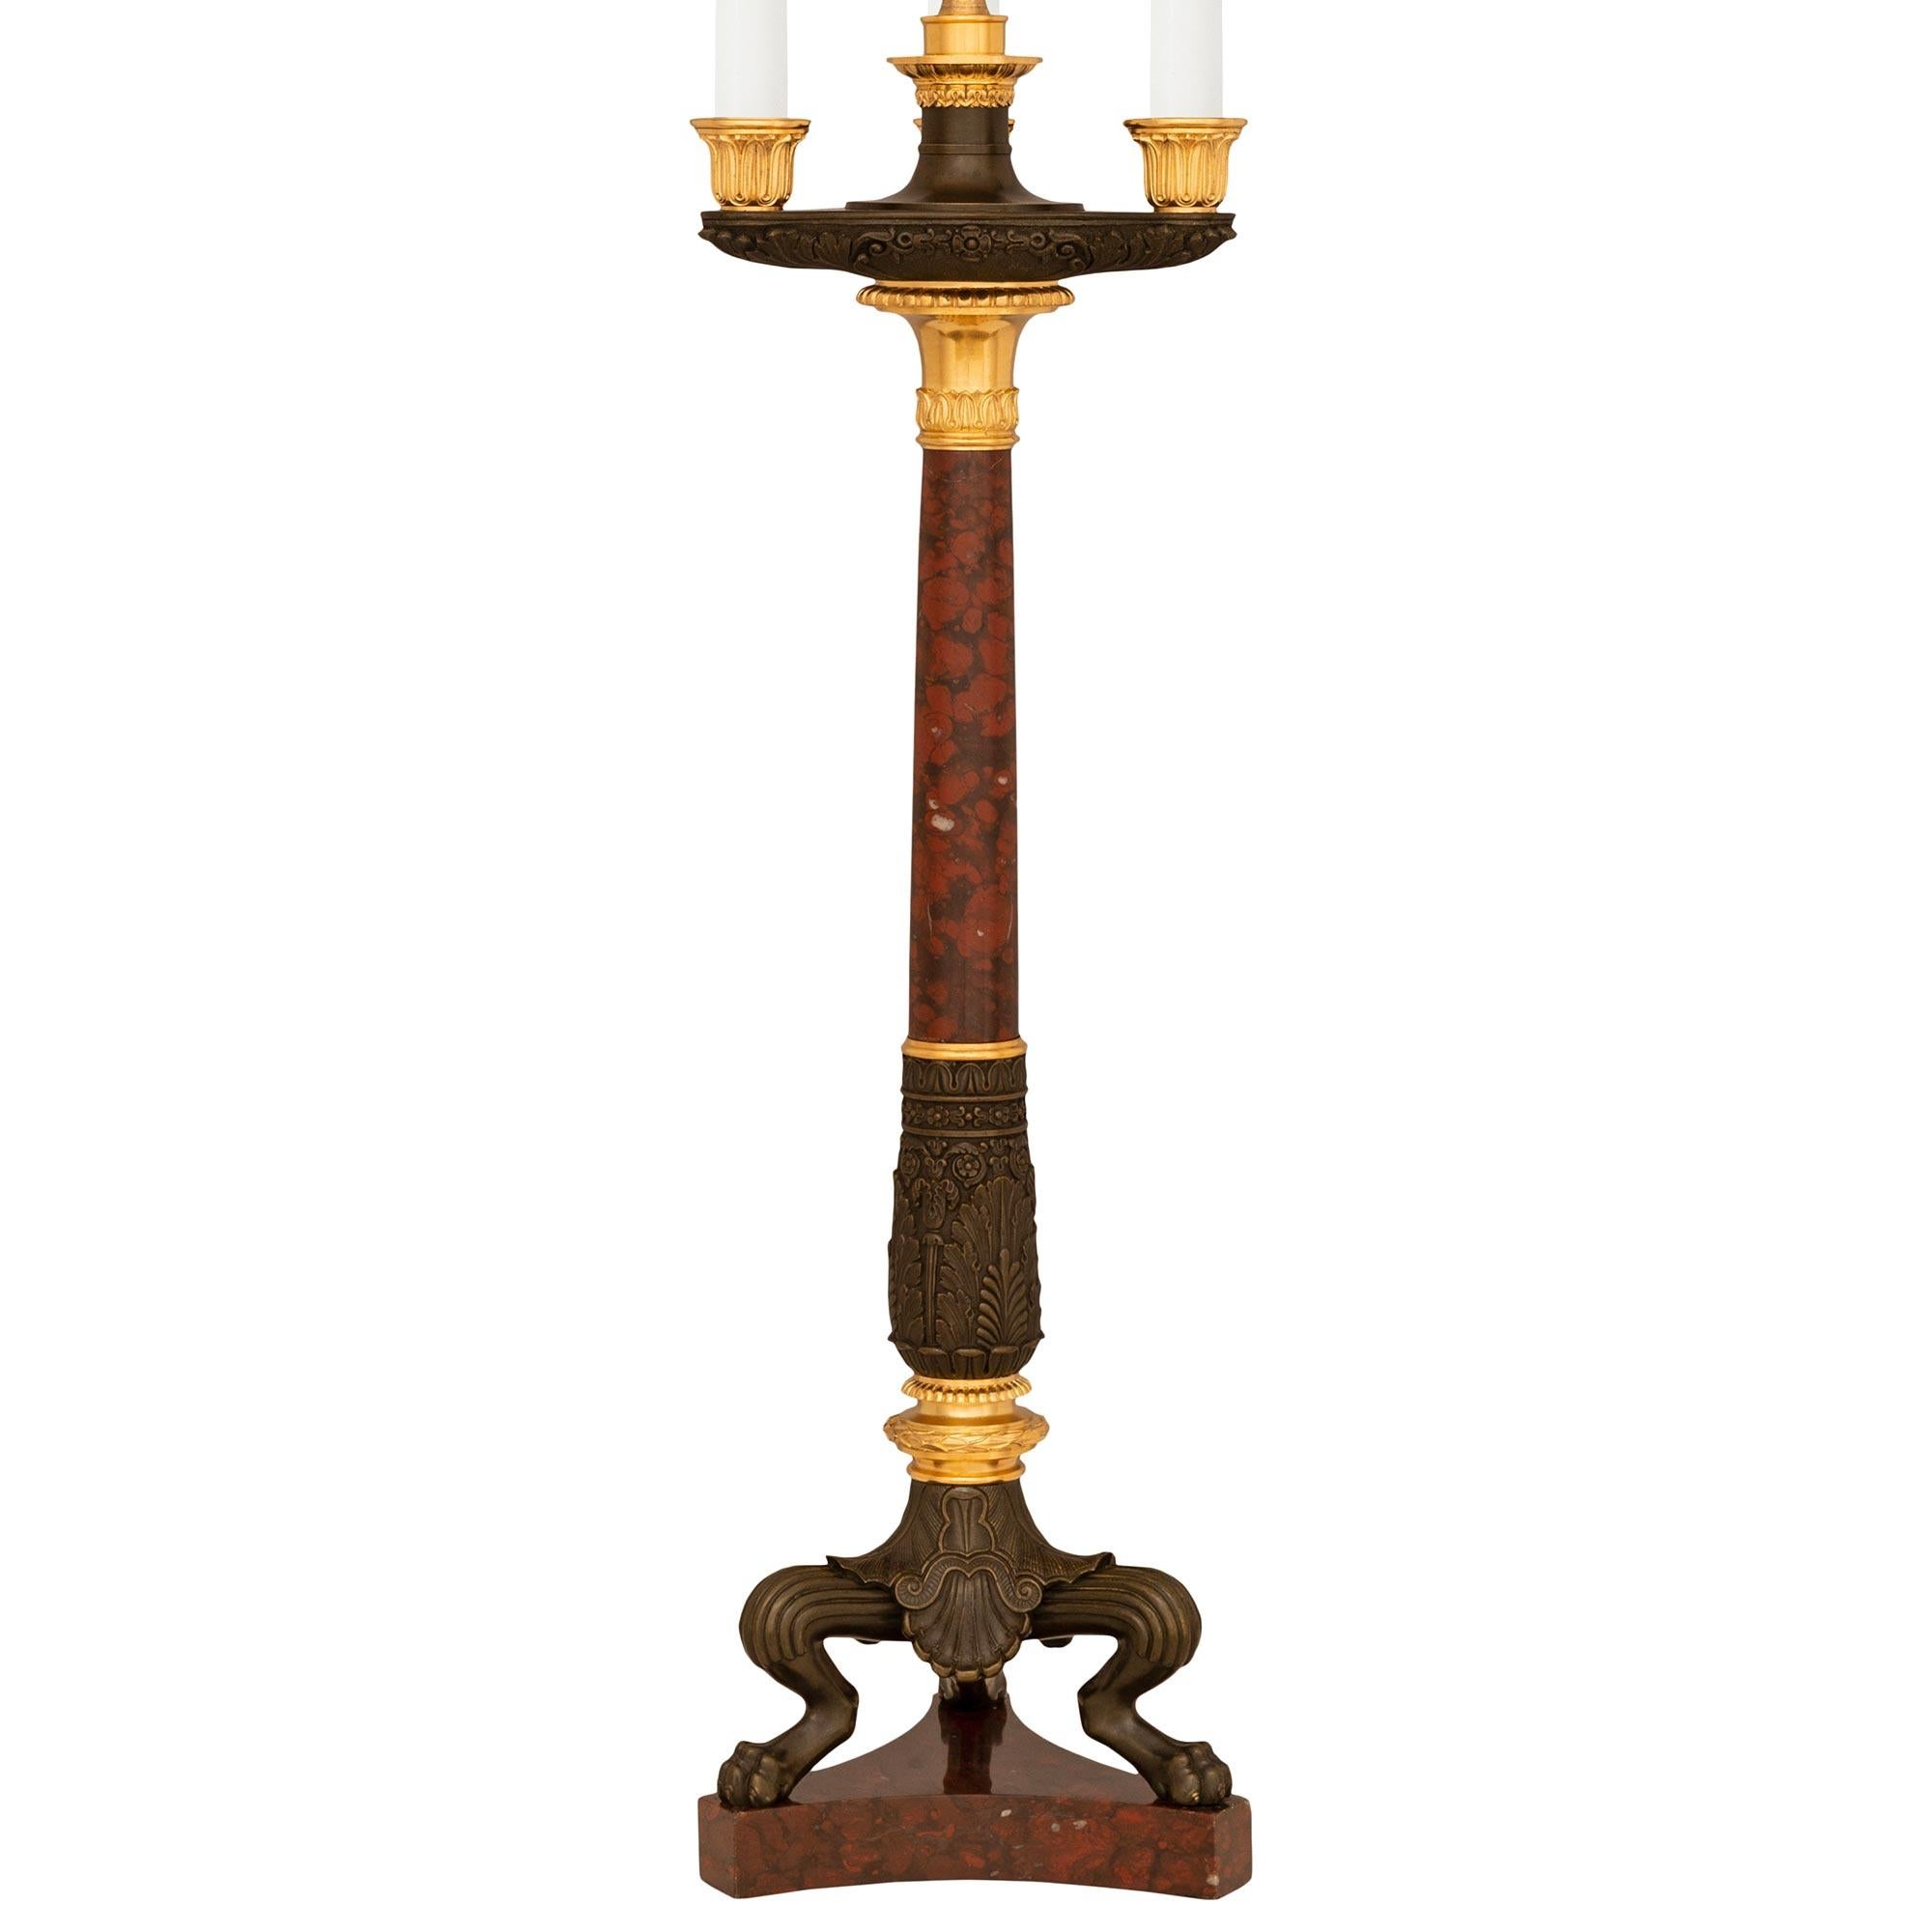 A stunning pair of French 19th century Charles X st. Rouge Griotte marble, Ormolu, and patinated Bronze candelabra lamps. Each wonderful three arm lamp with two central electrified lights is raised by a triangular Rouge Griotte marble base with